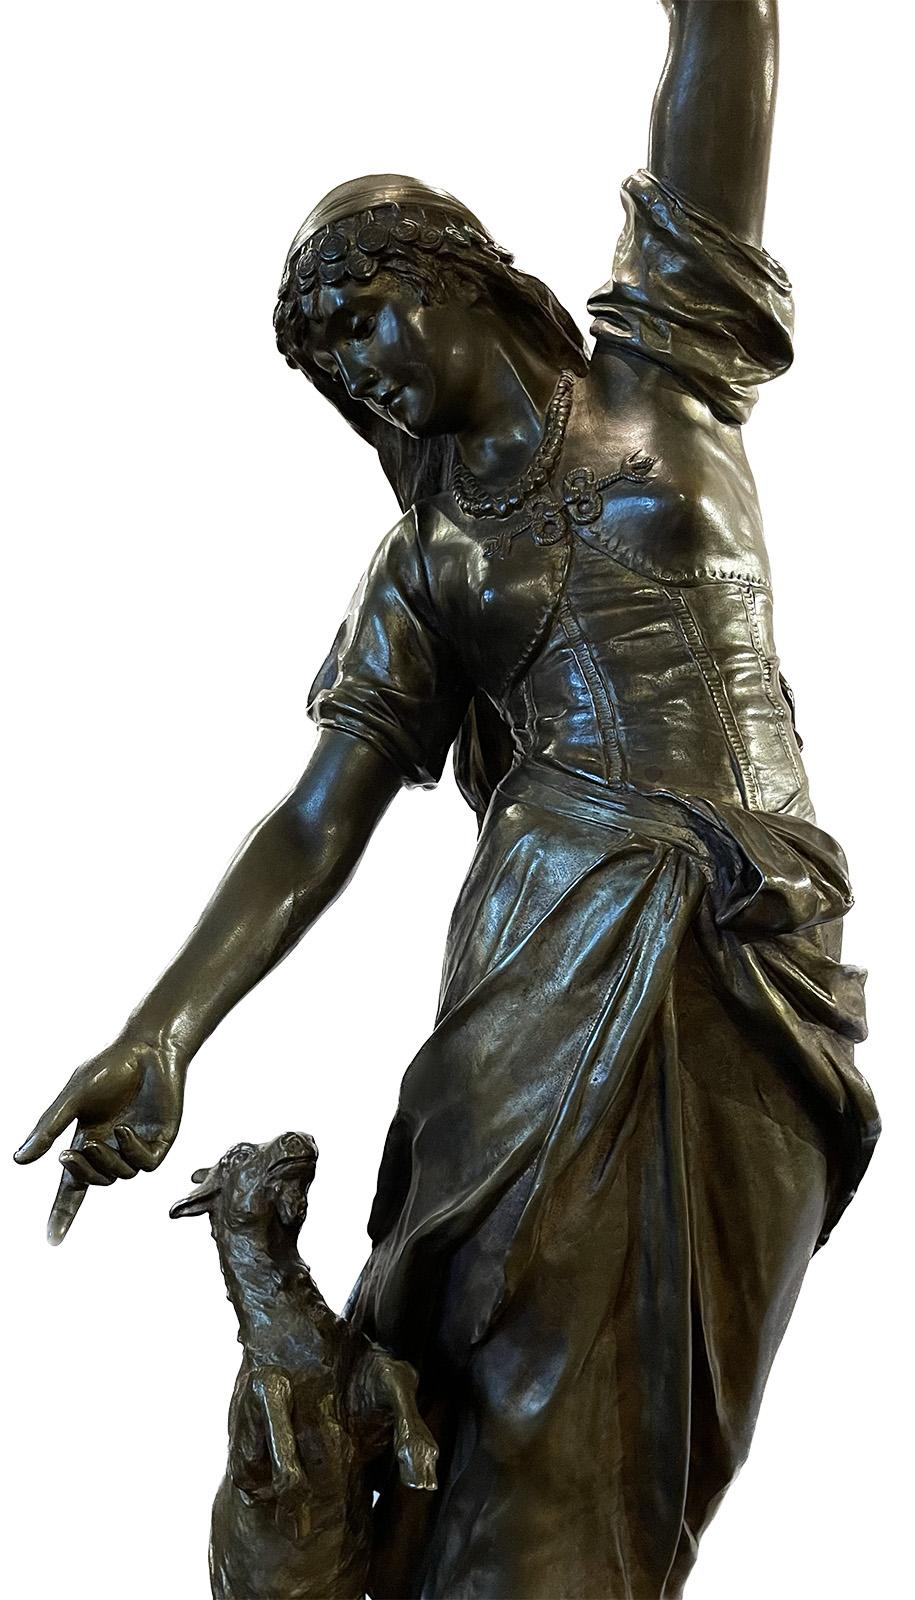 Bronze figure sculpture of Esmeralda mounted into a lamp signed by Eugene Marioton (French, 1857 - 1933).